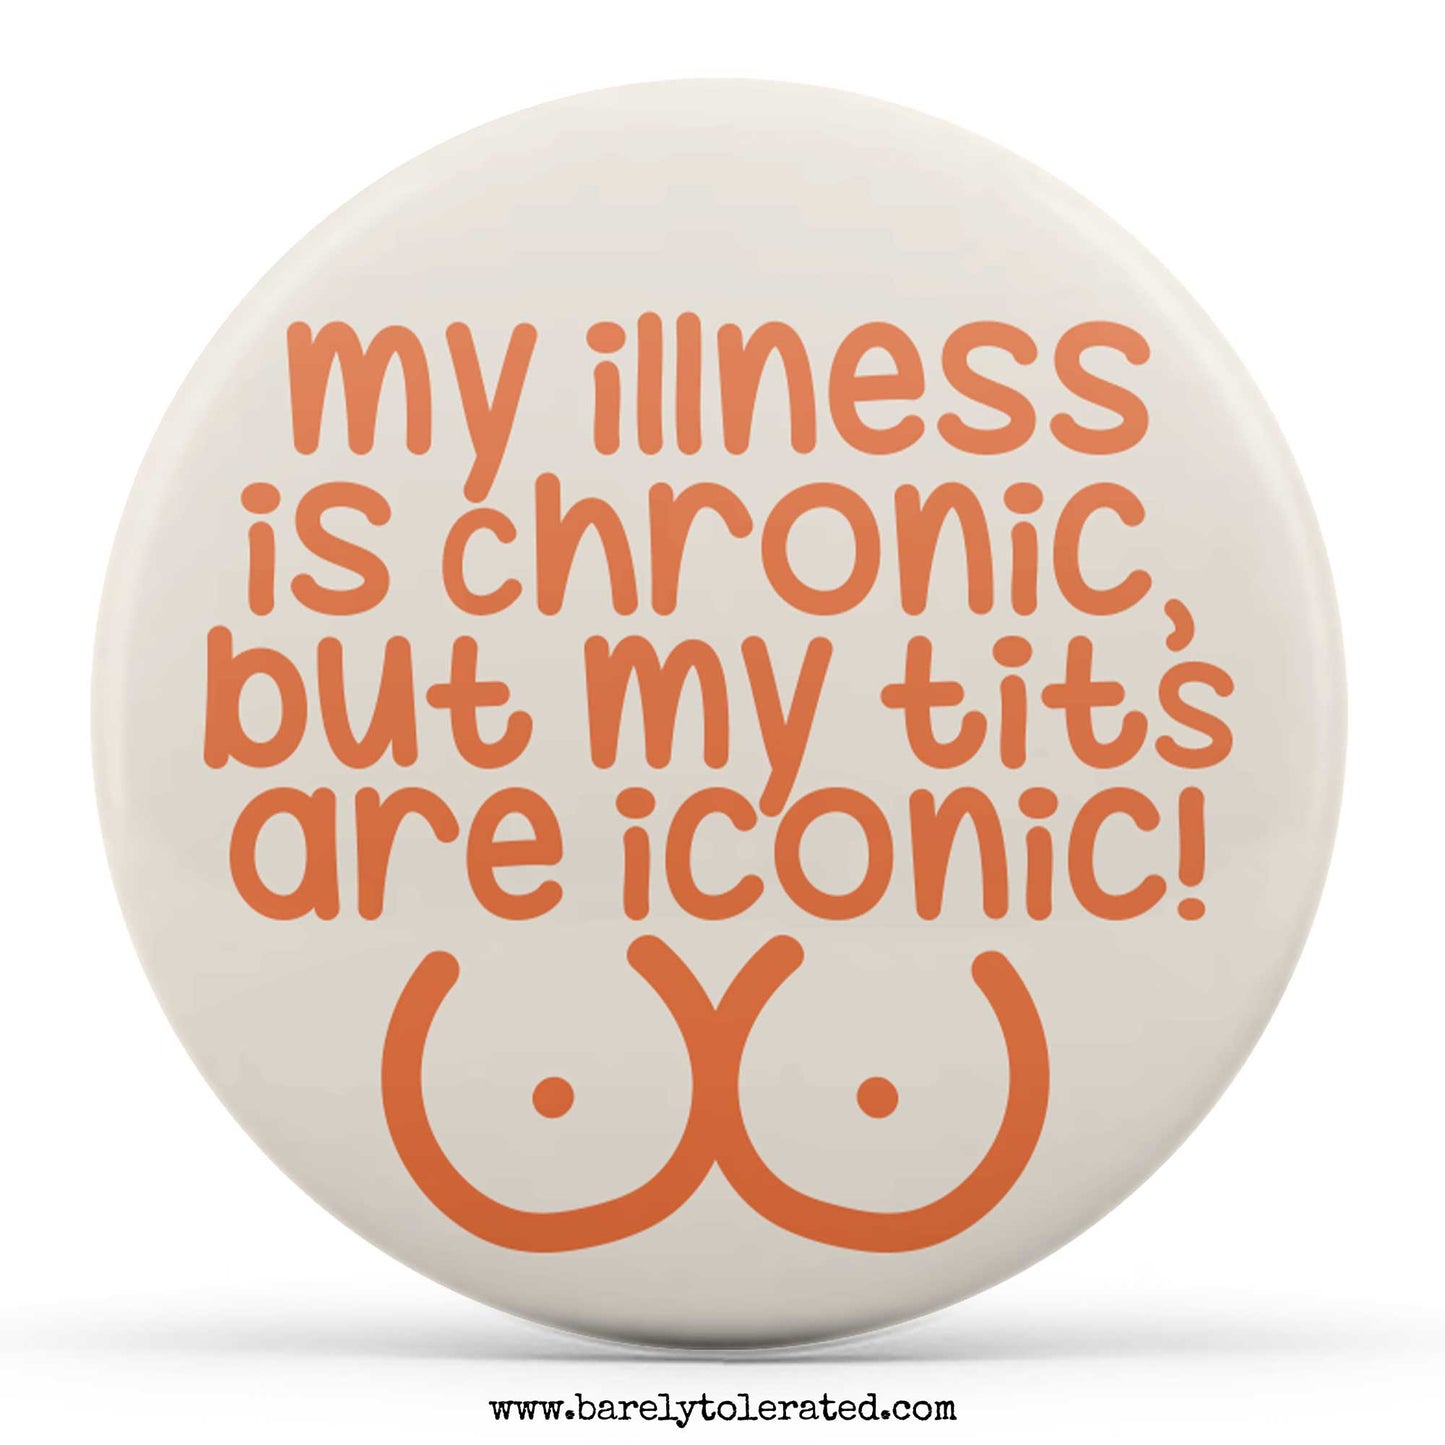 My Illness is Chronic But My Tits Are Iconic!